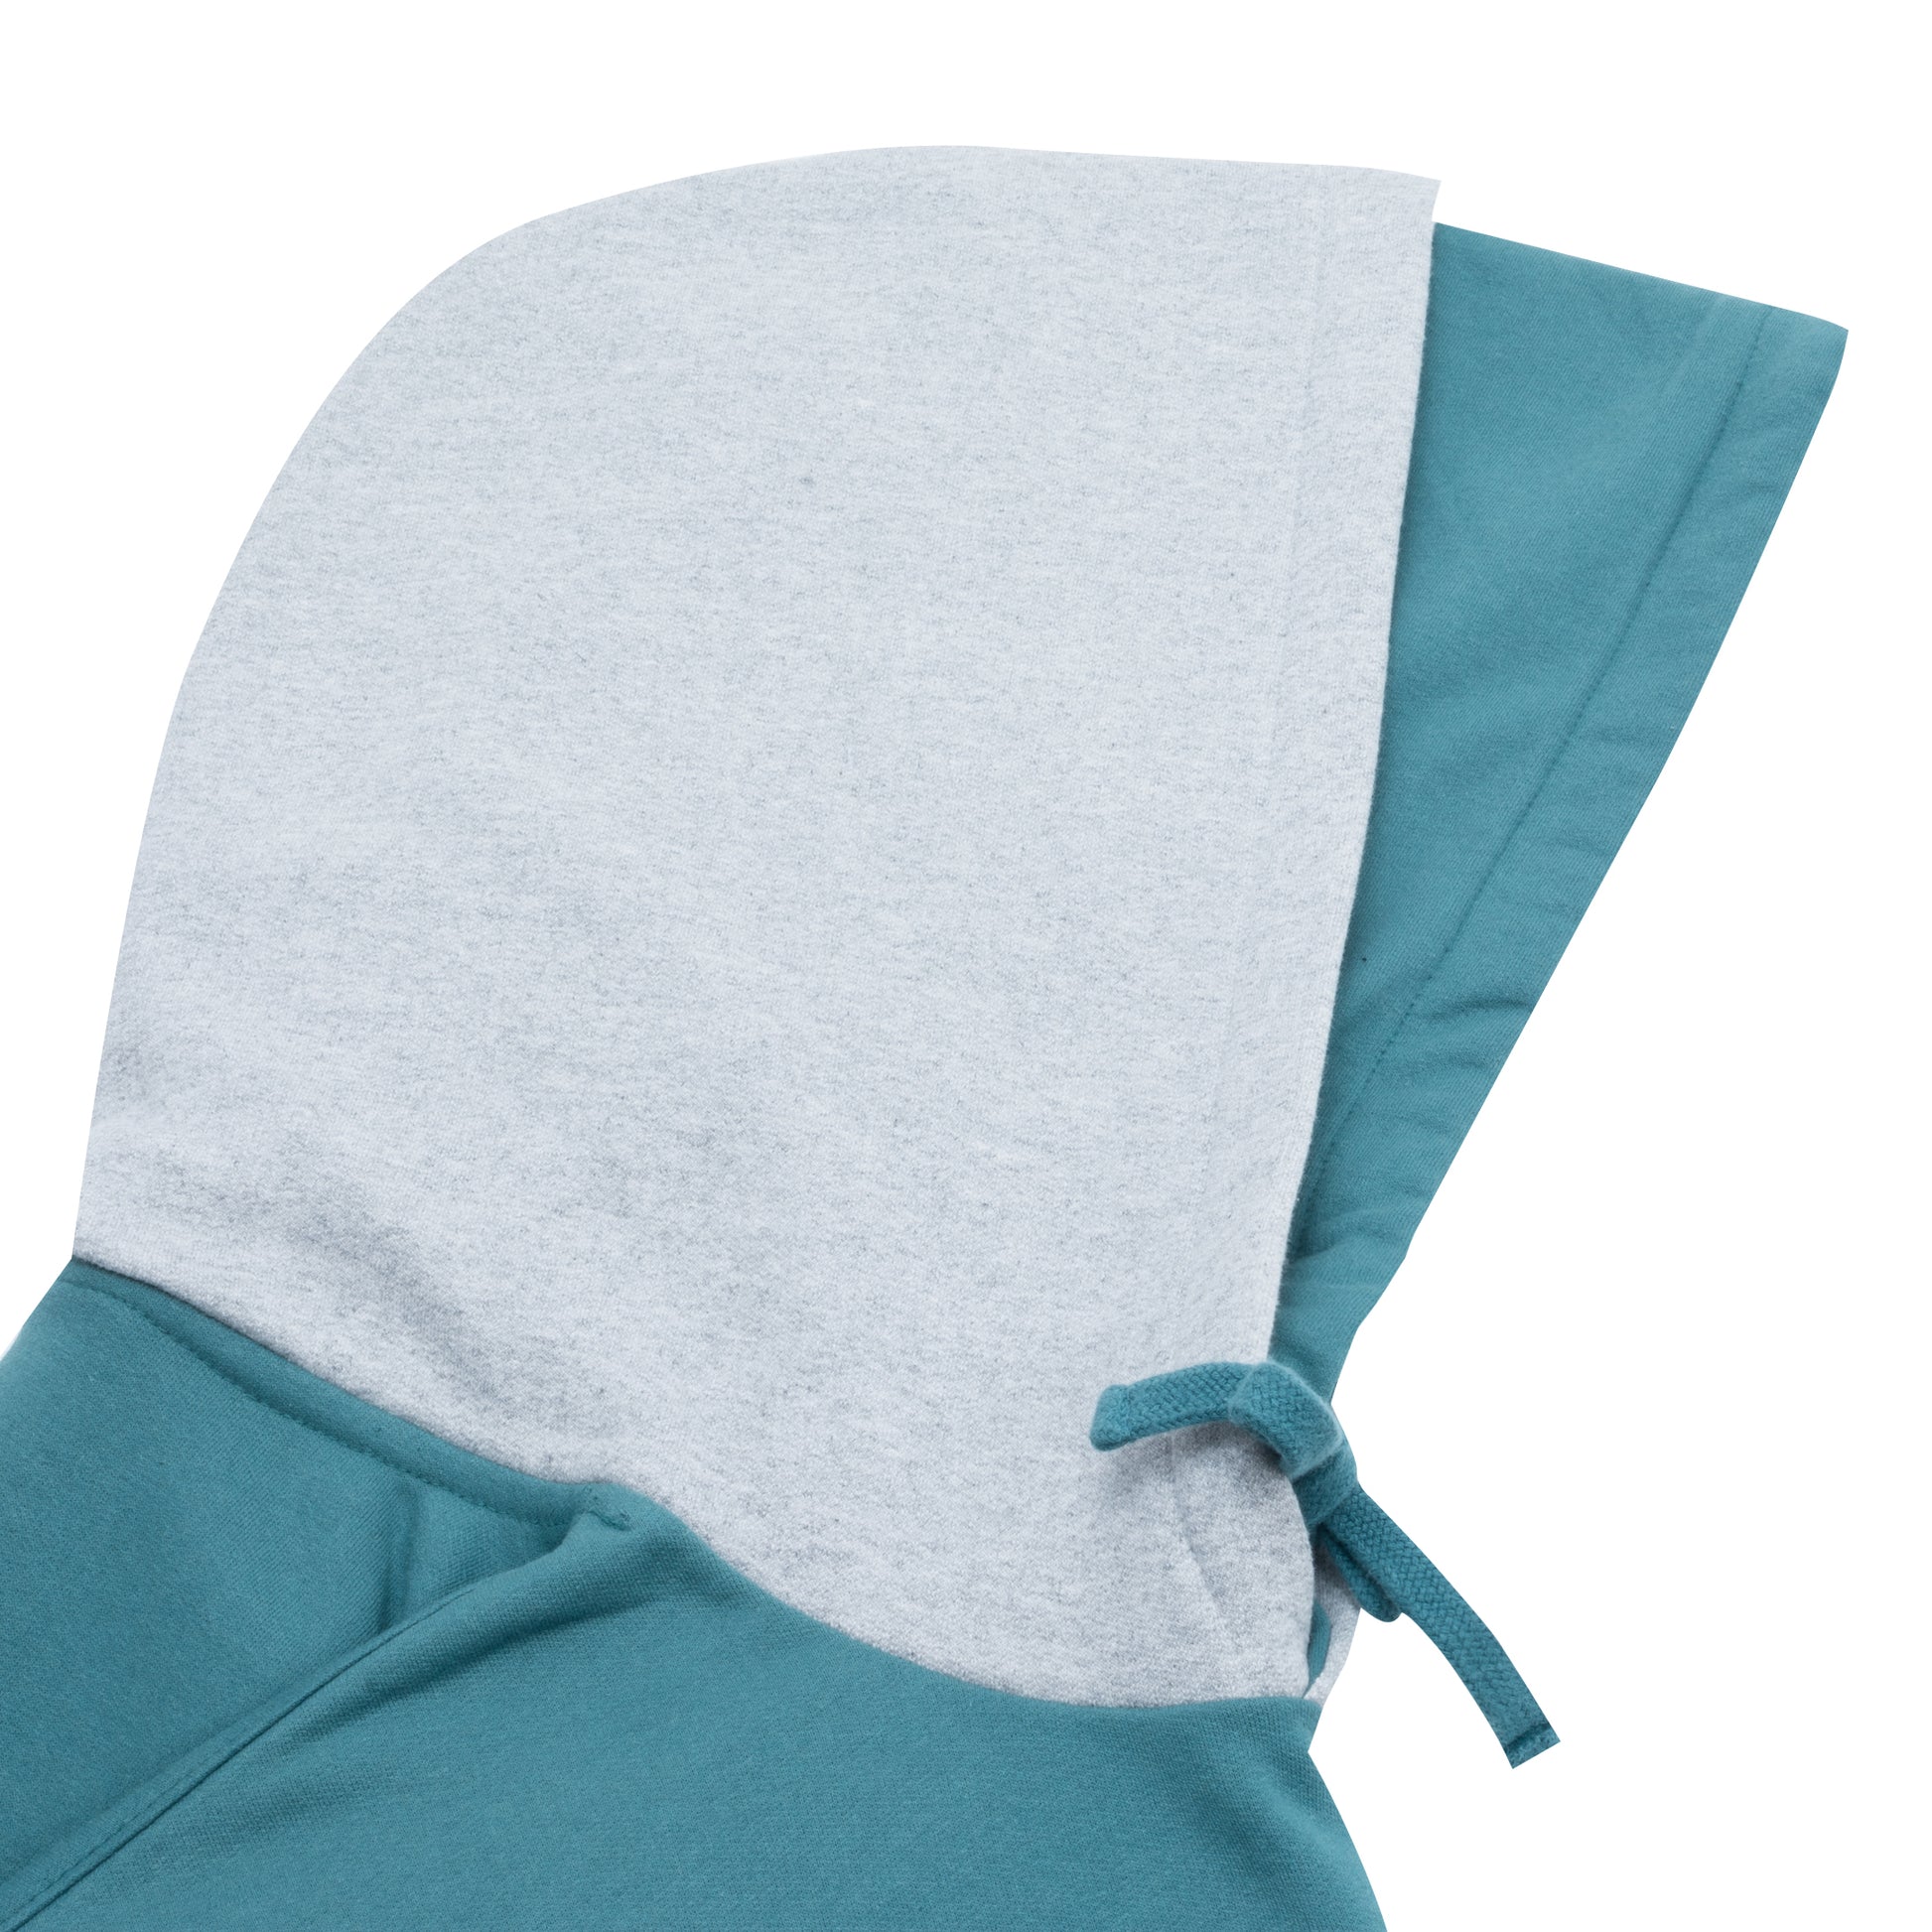 HIGH - Double Hooded Pullover "Oil Blue" - THE GAME